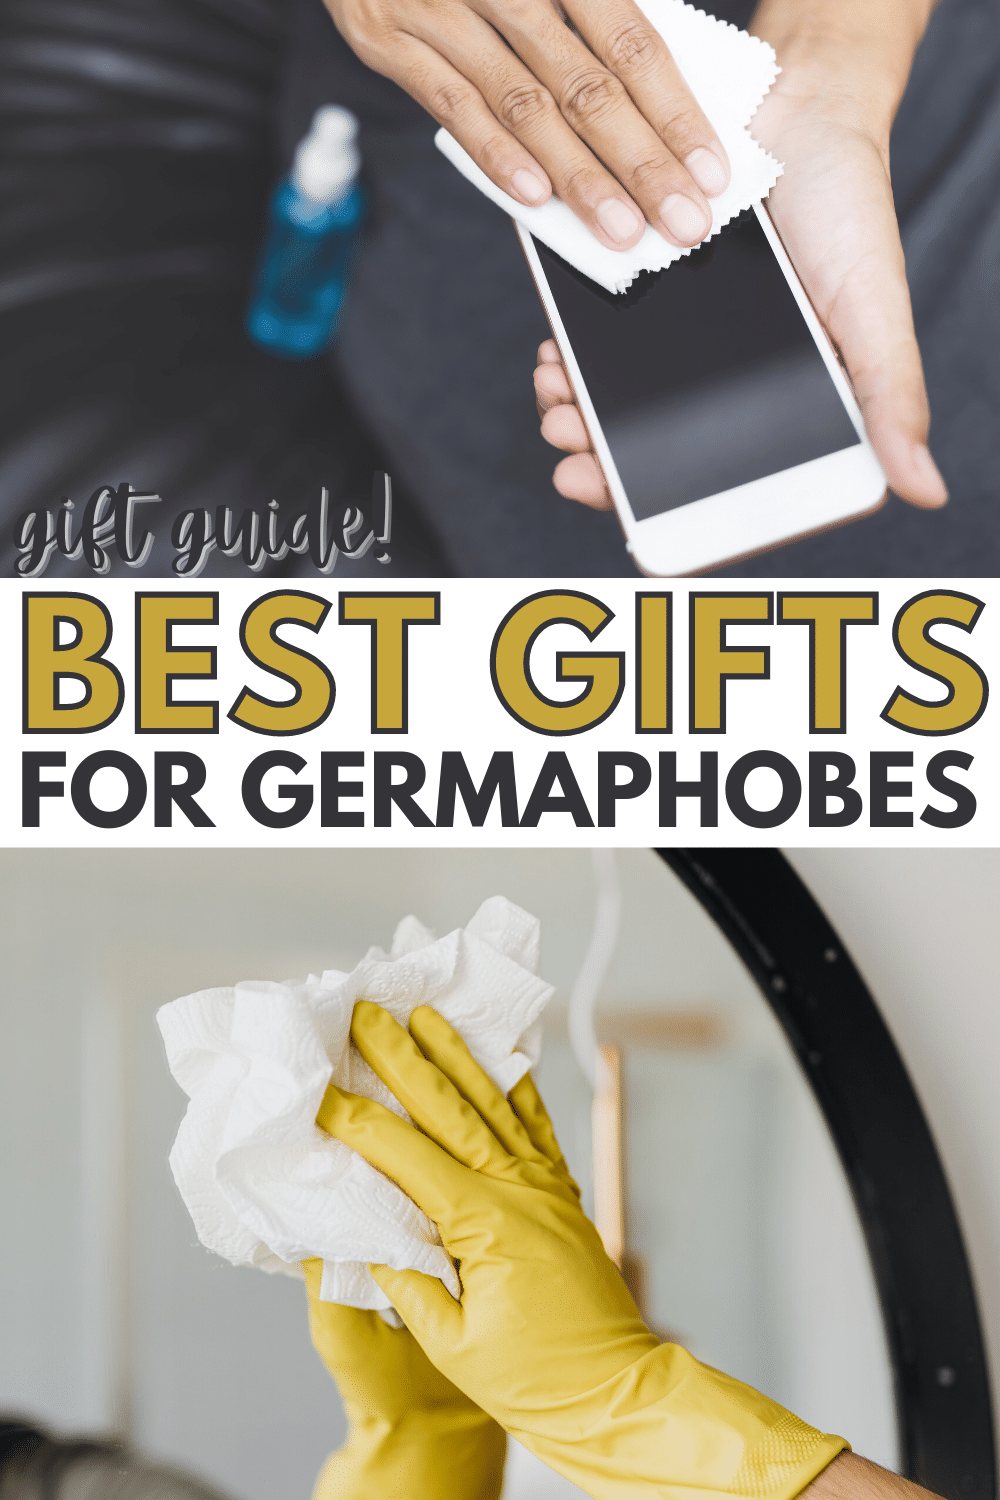 Do you have a friend who hates germs? This list of the best gifts for germaphobes has plenty of ideas he or she will love! #germaphobe #giftideas #giftguide via @wondermomwannab